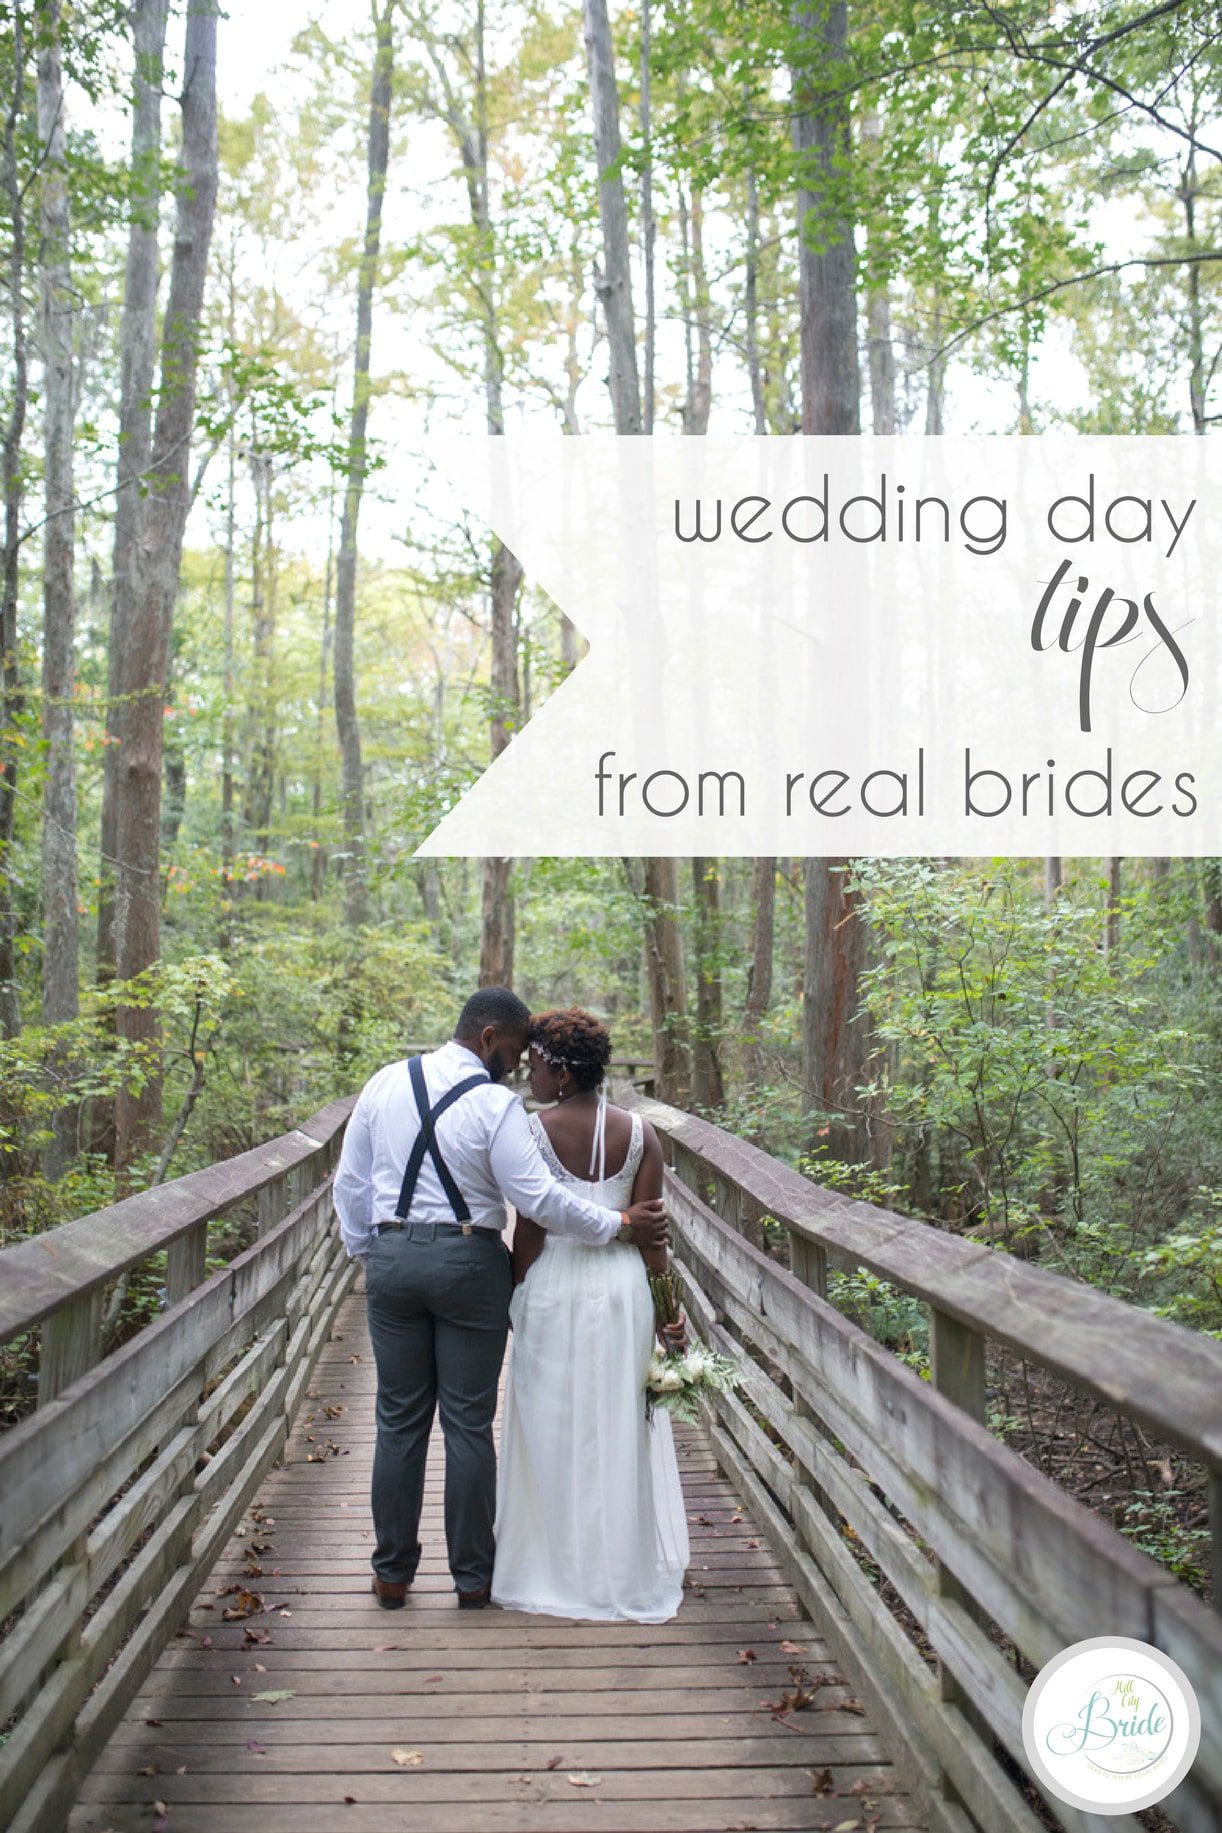 Wedding Day Tips from Real Brides | Hill City Bride Virginia Wedding Blog Advice